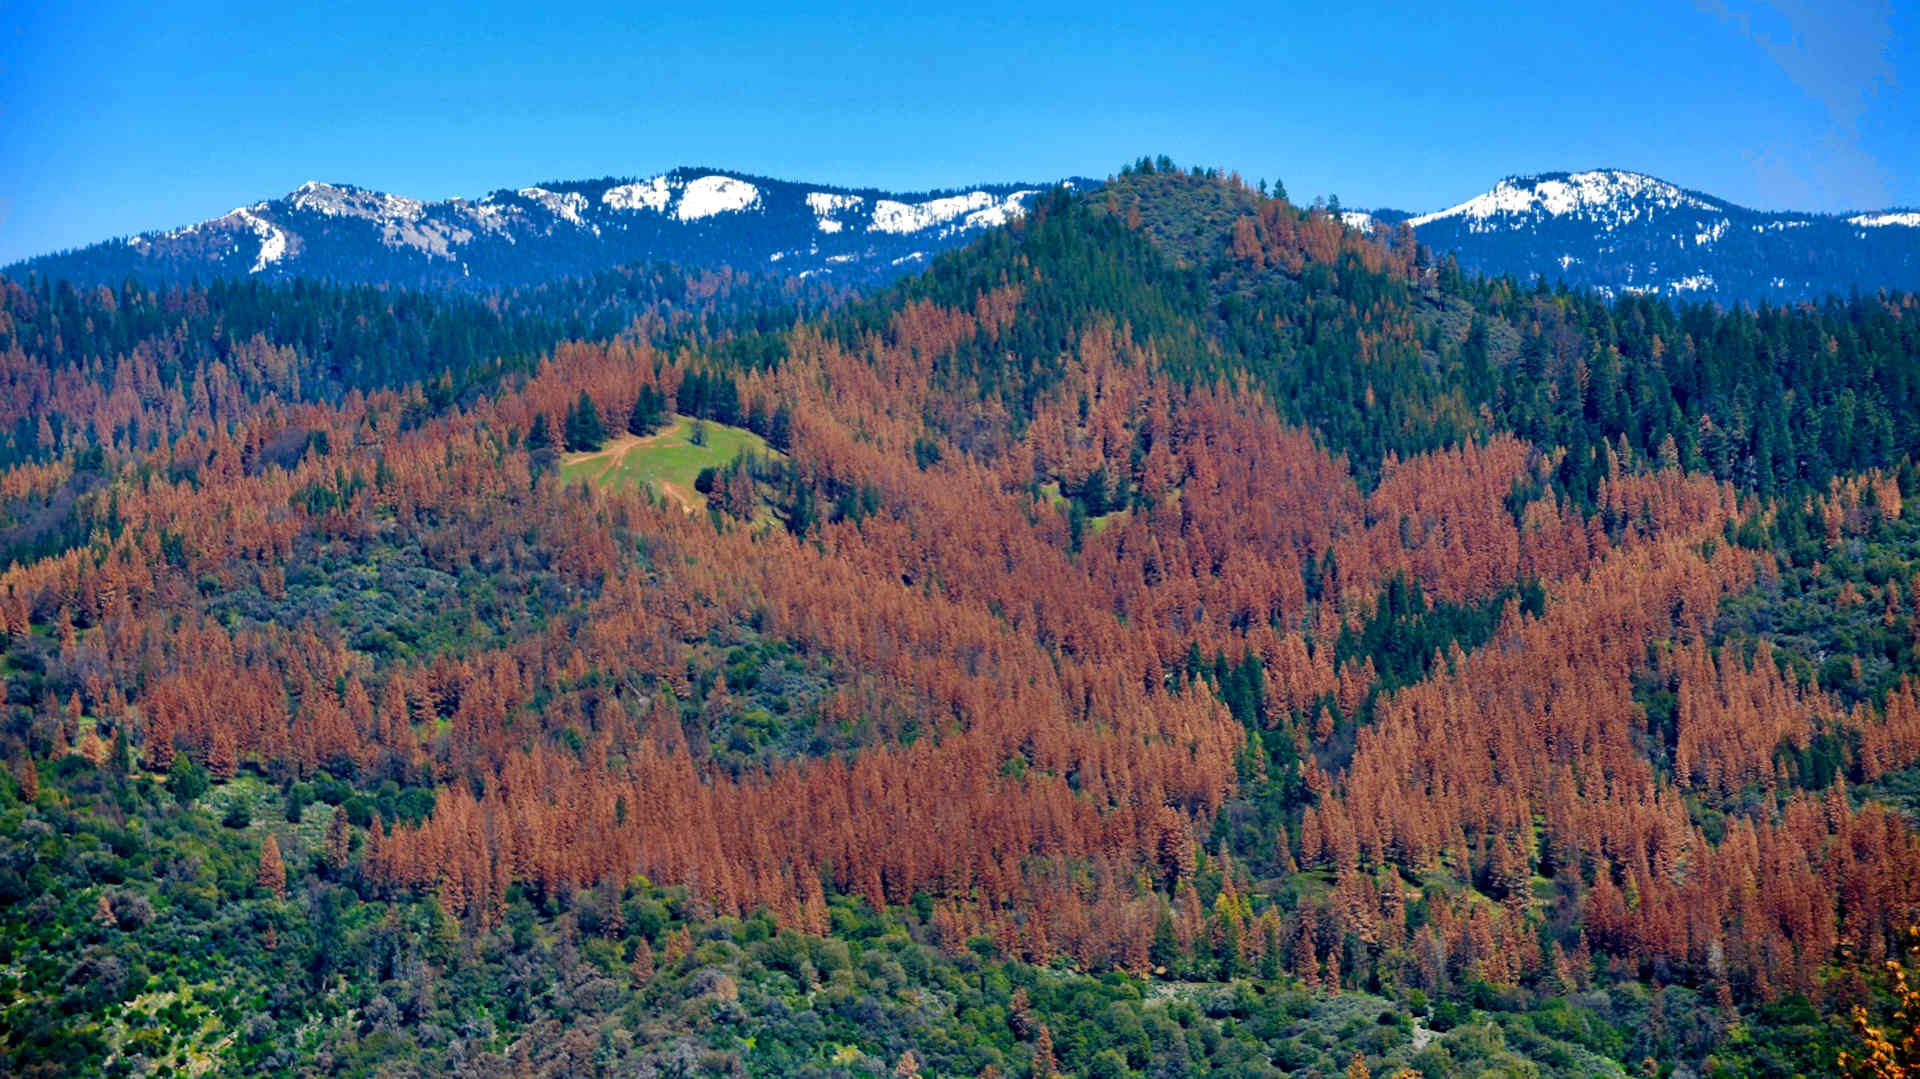 During the 2012-2015 drought in the Sierra Nevada, nearly 90 percent of the ponderosa pines died, primarily due to infestations of western pine beetles in the drought-stressed trees.